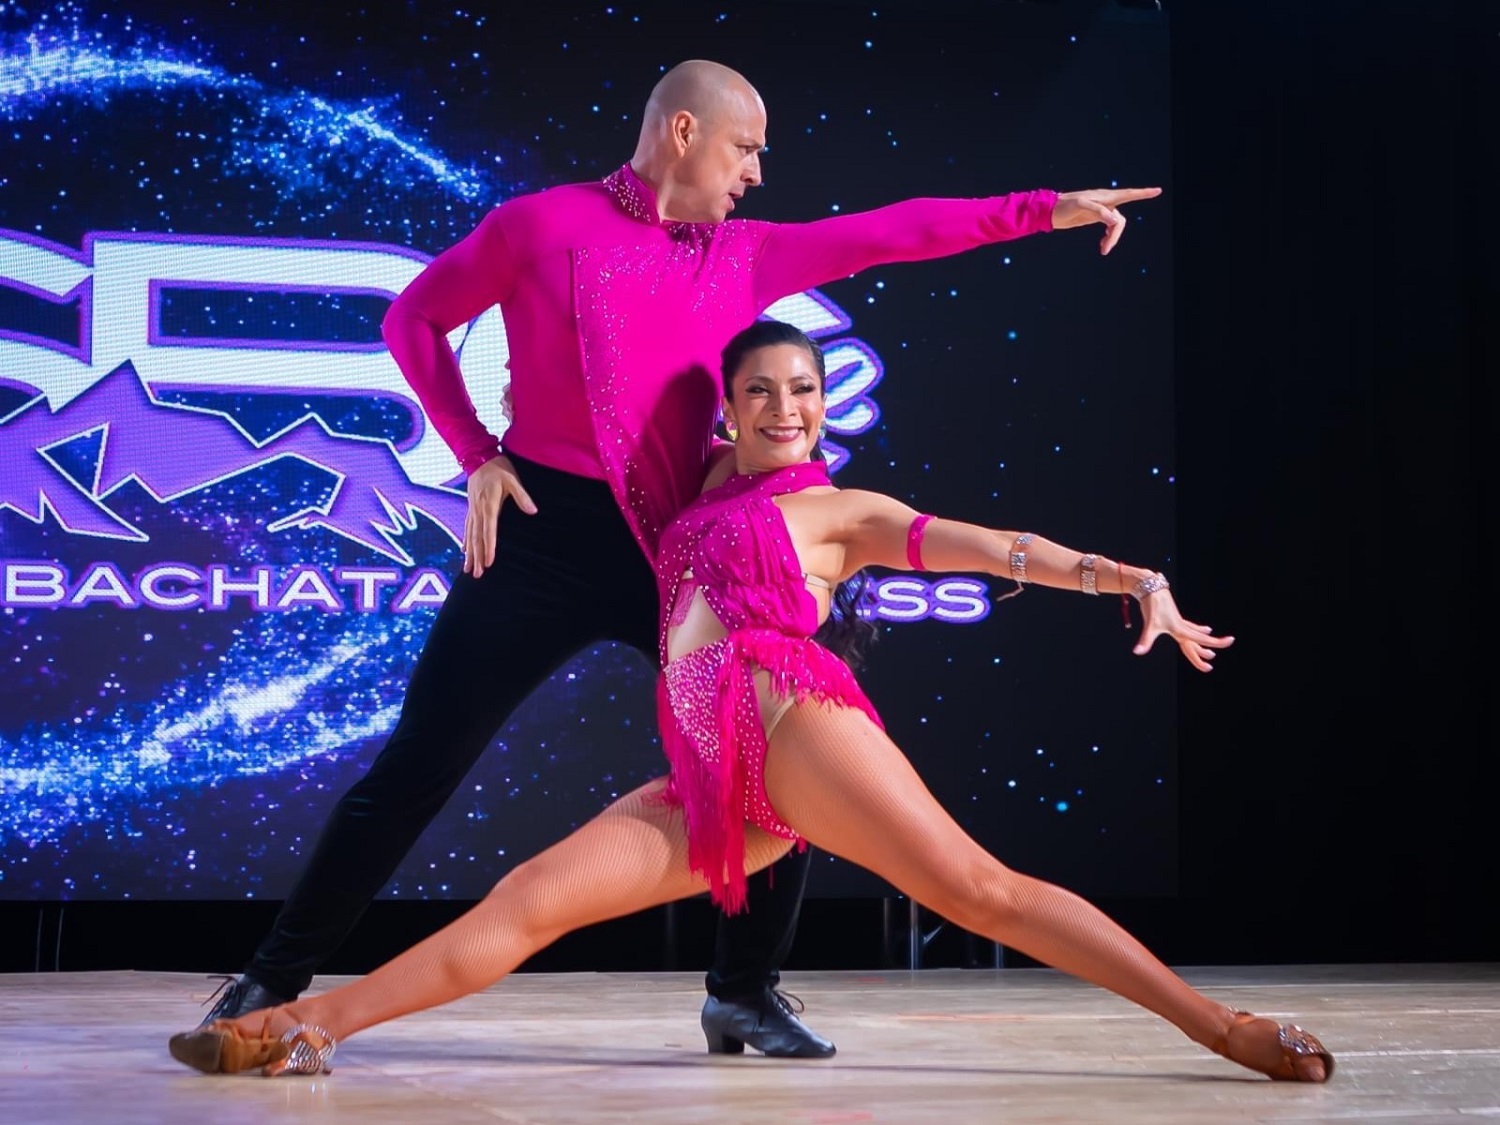 Rodrigo and Wendy in pink costumes at a dance competition